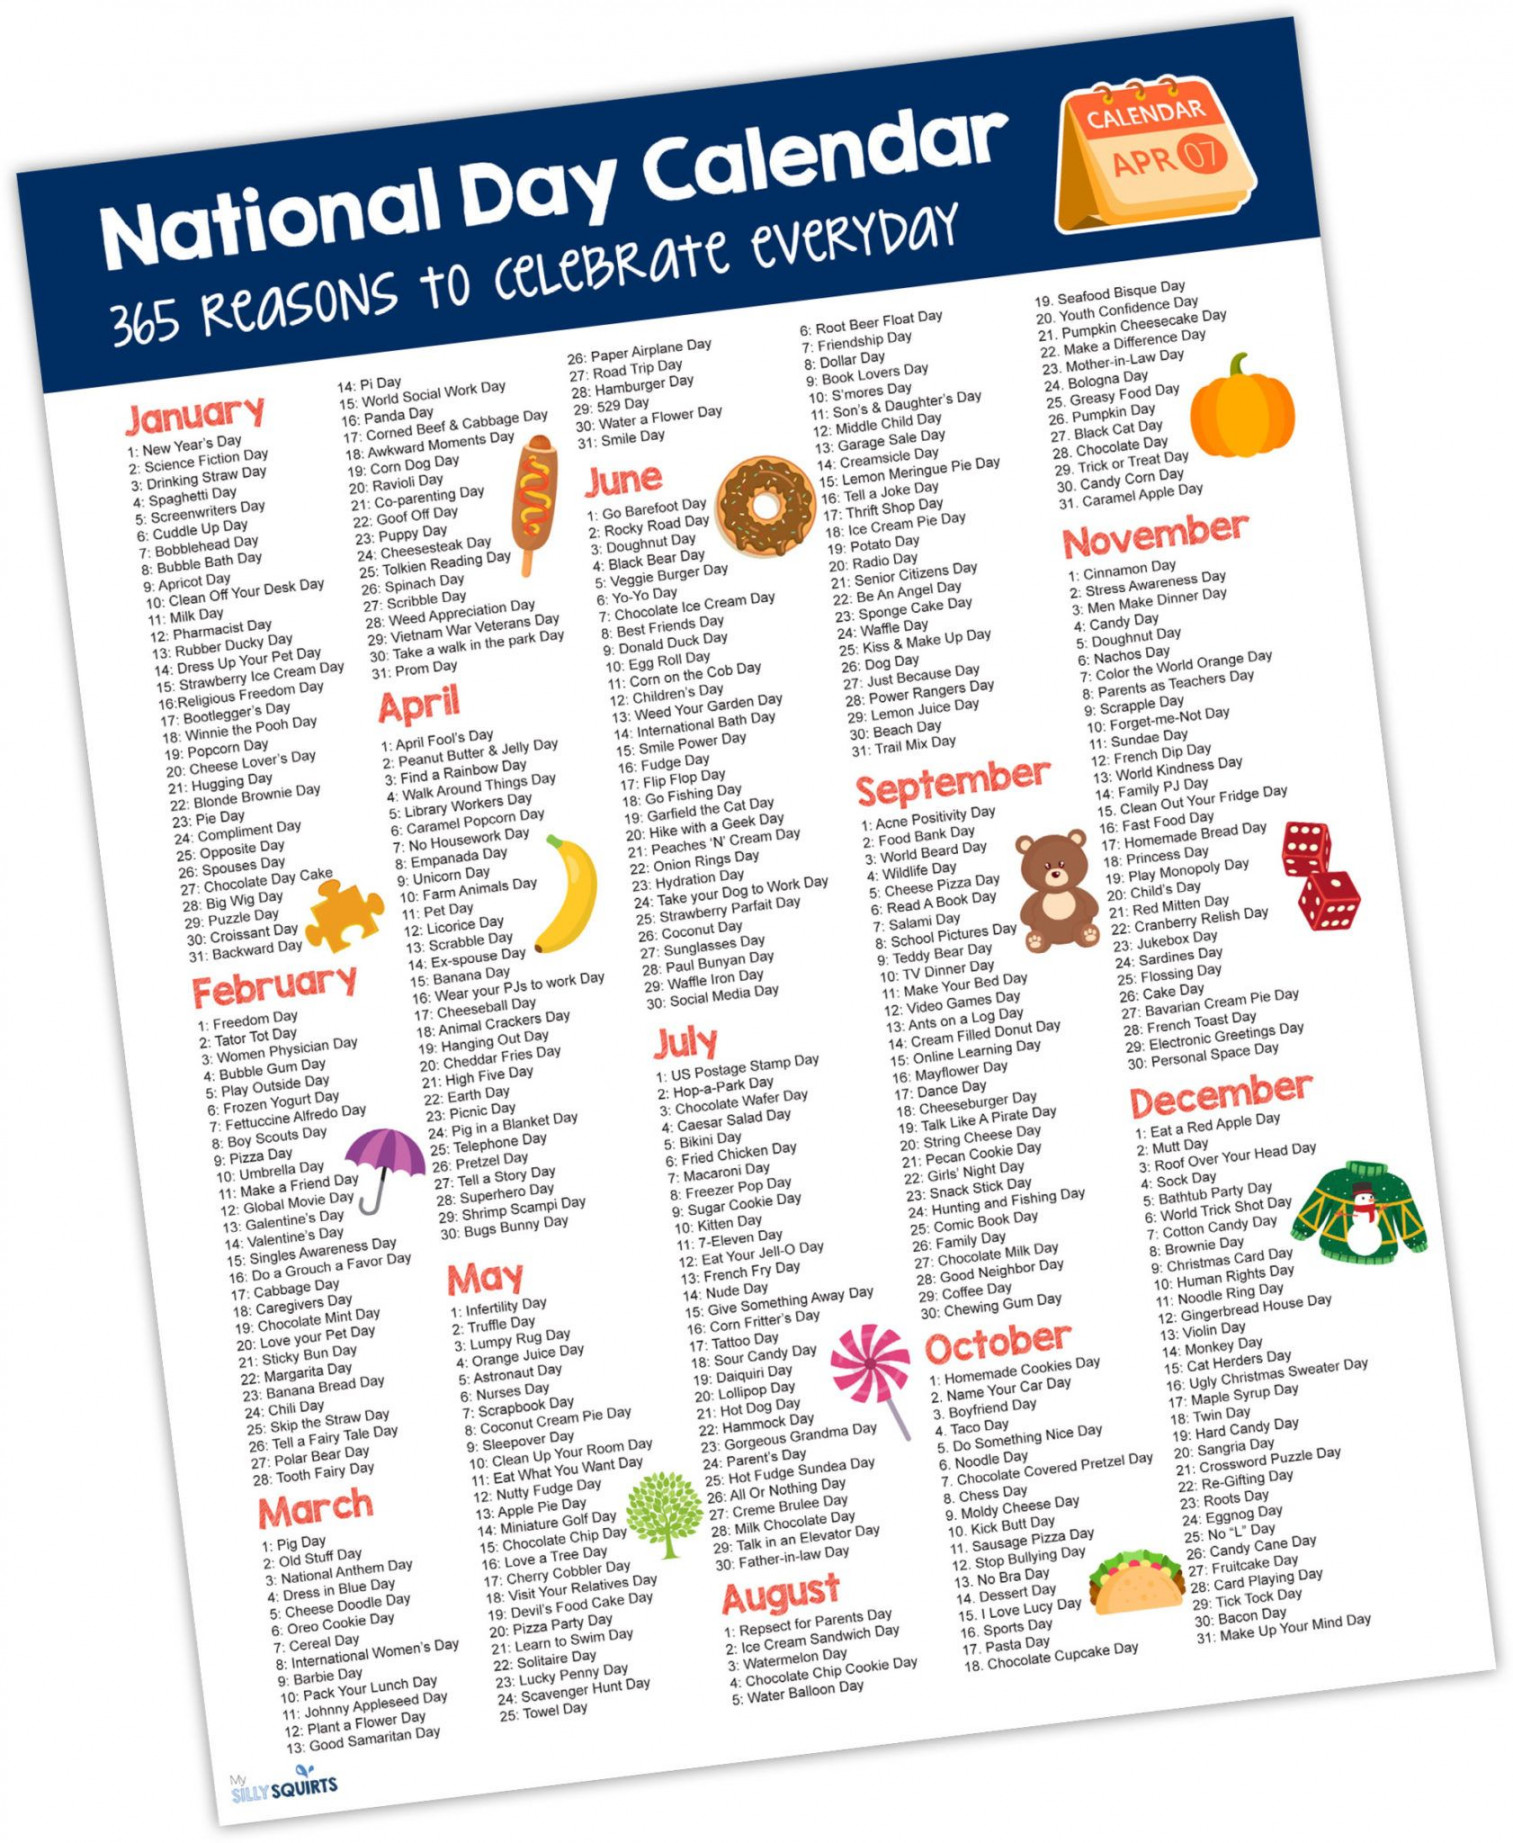 National Day Calendar: reasons to celebrate everyday in